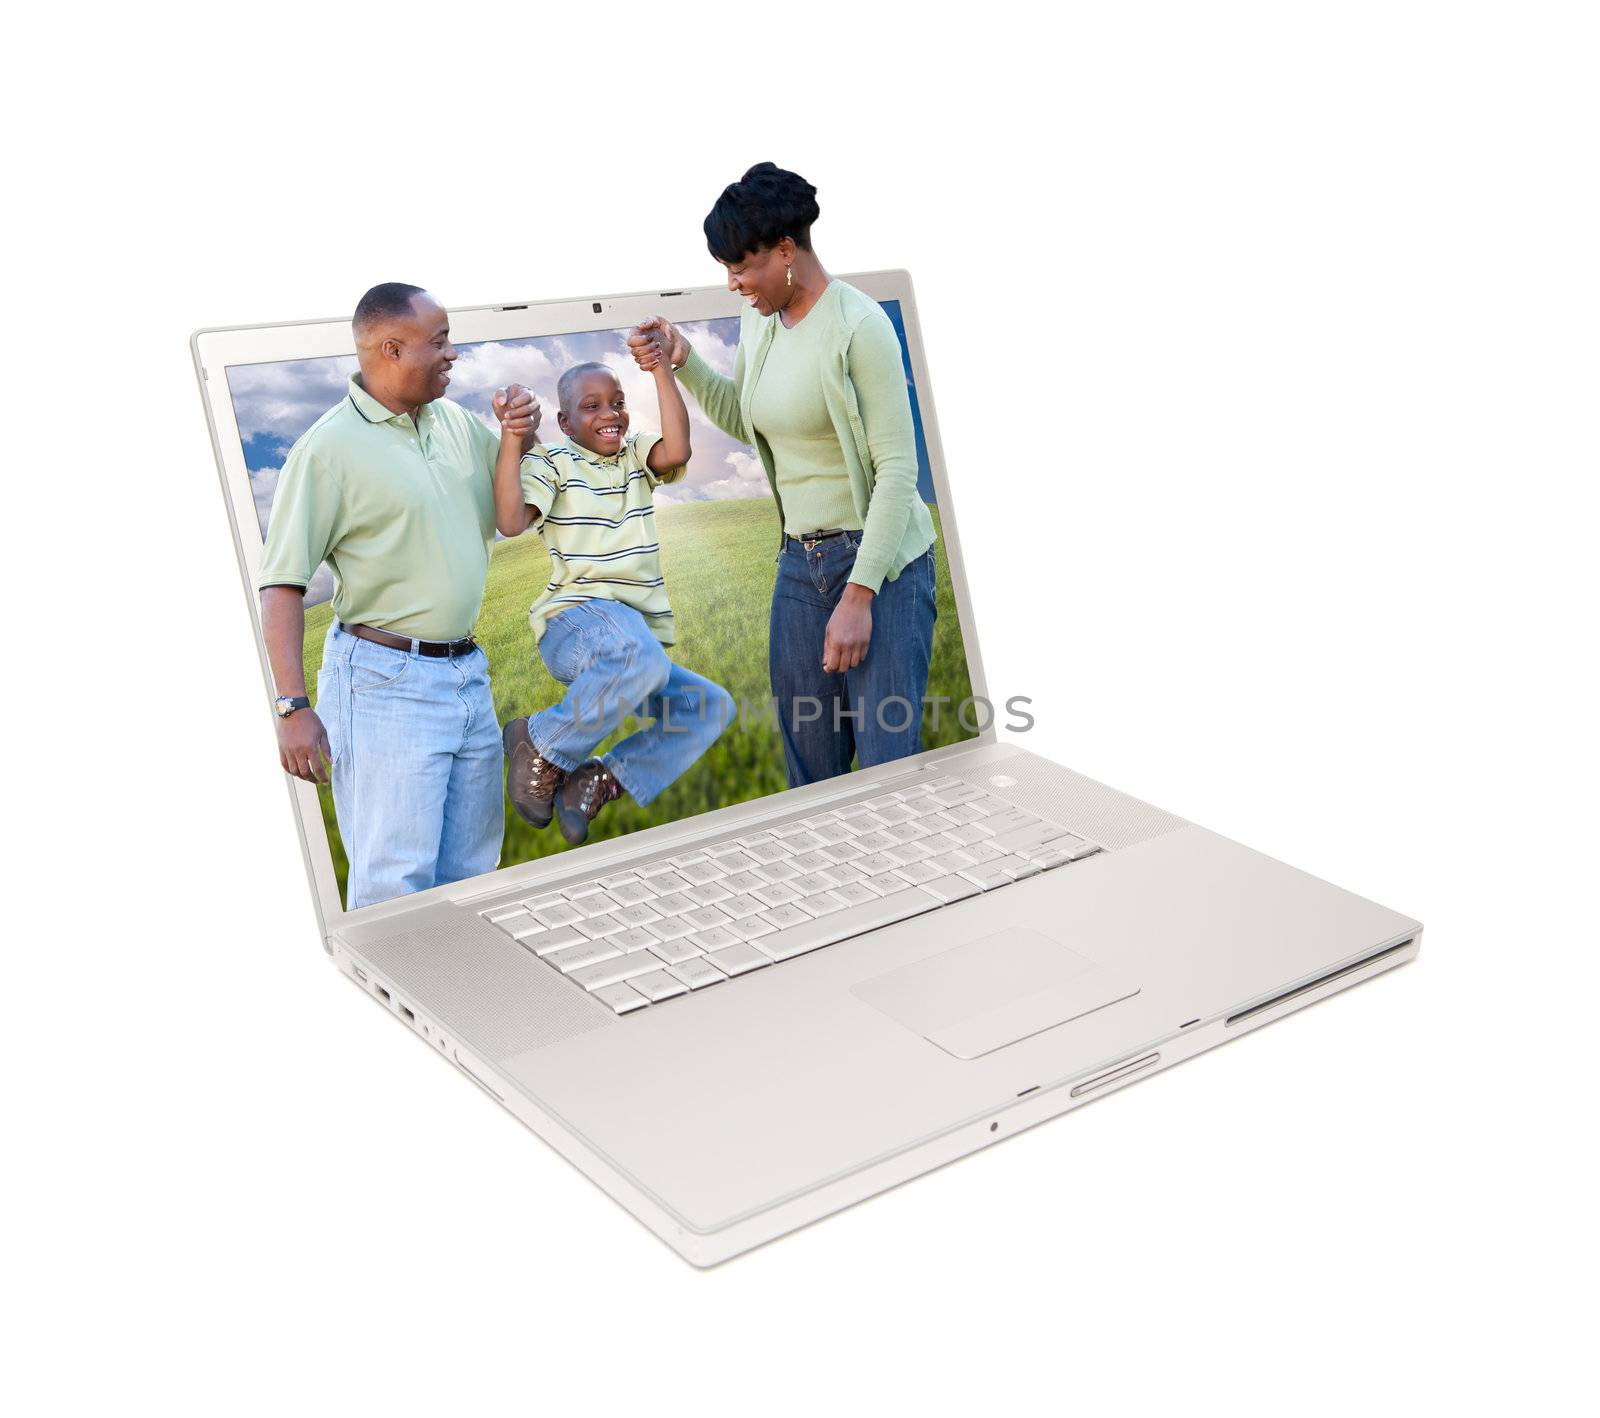 Happy African American Family in Laptop Screen Isolated on White.